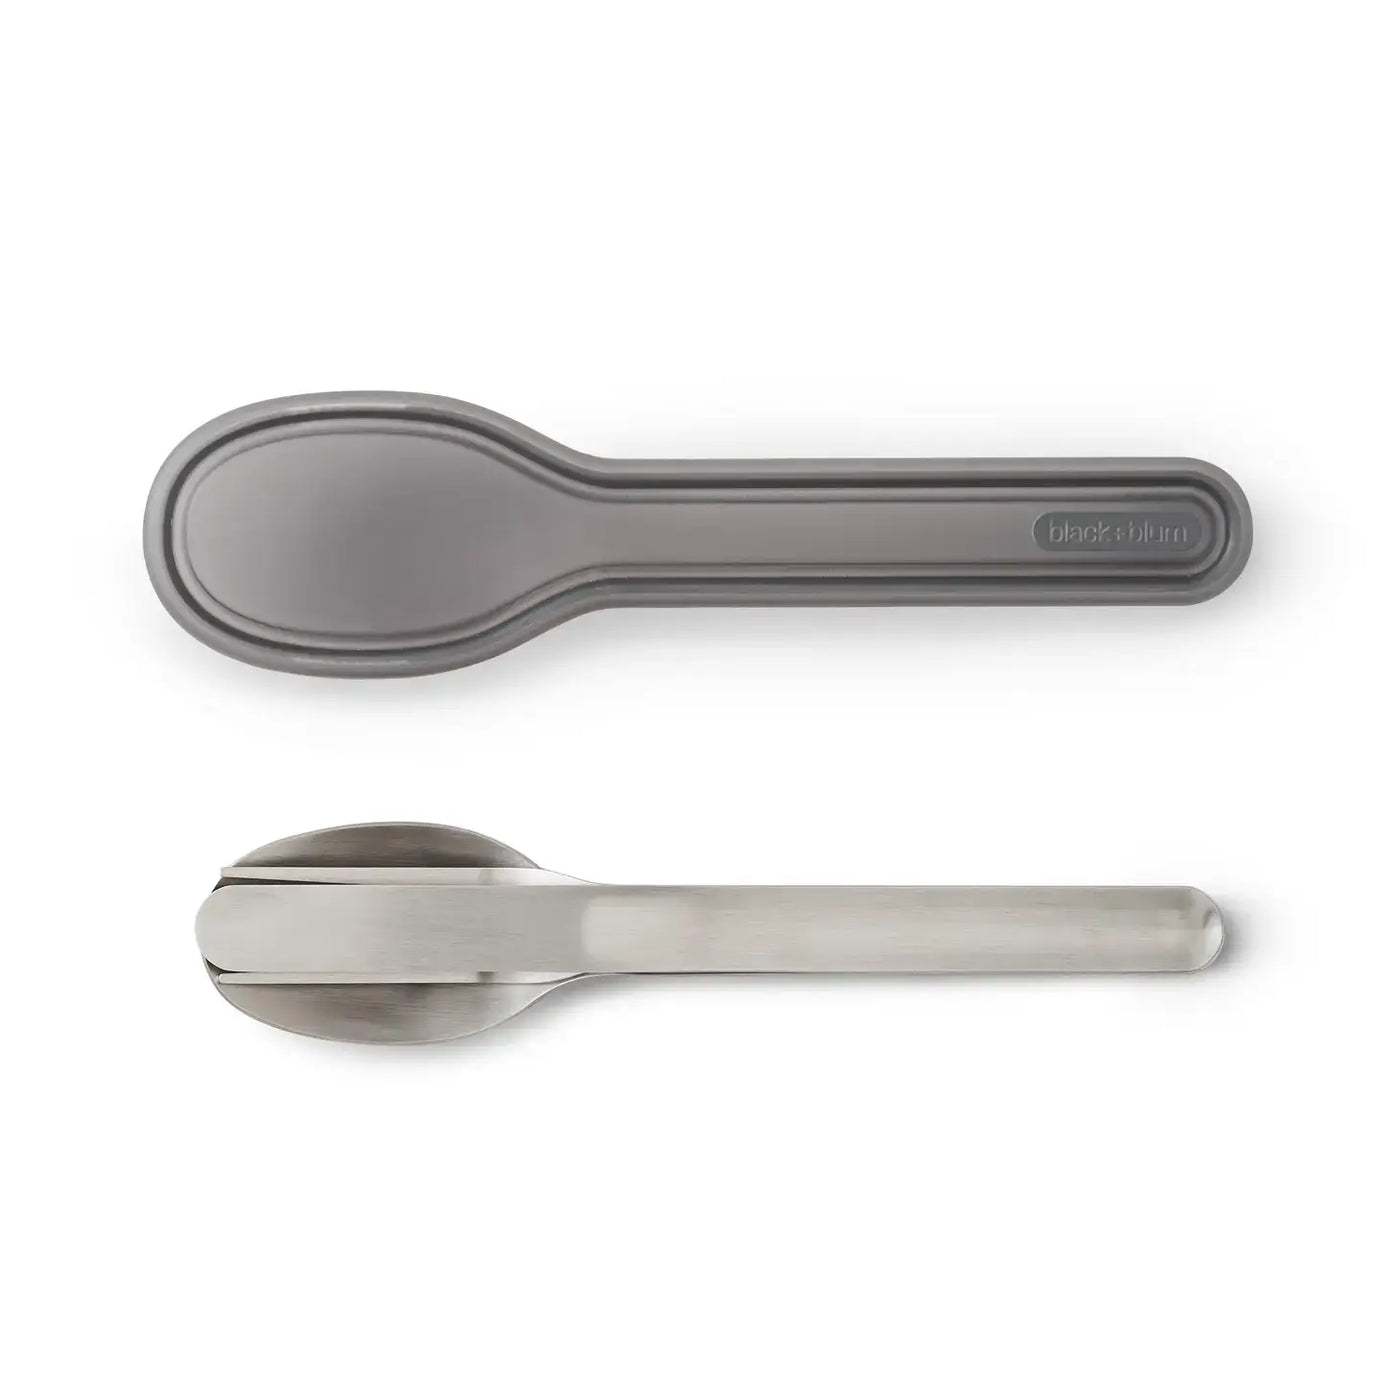 Cutlery Set with Portable Hygienic Carry Case